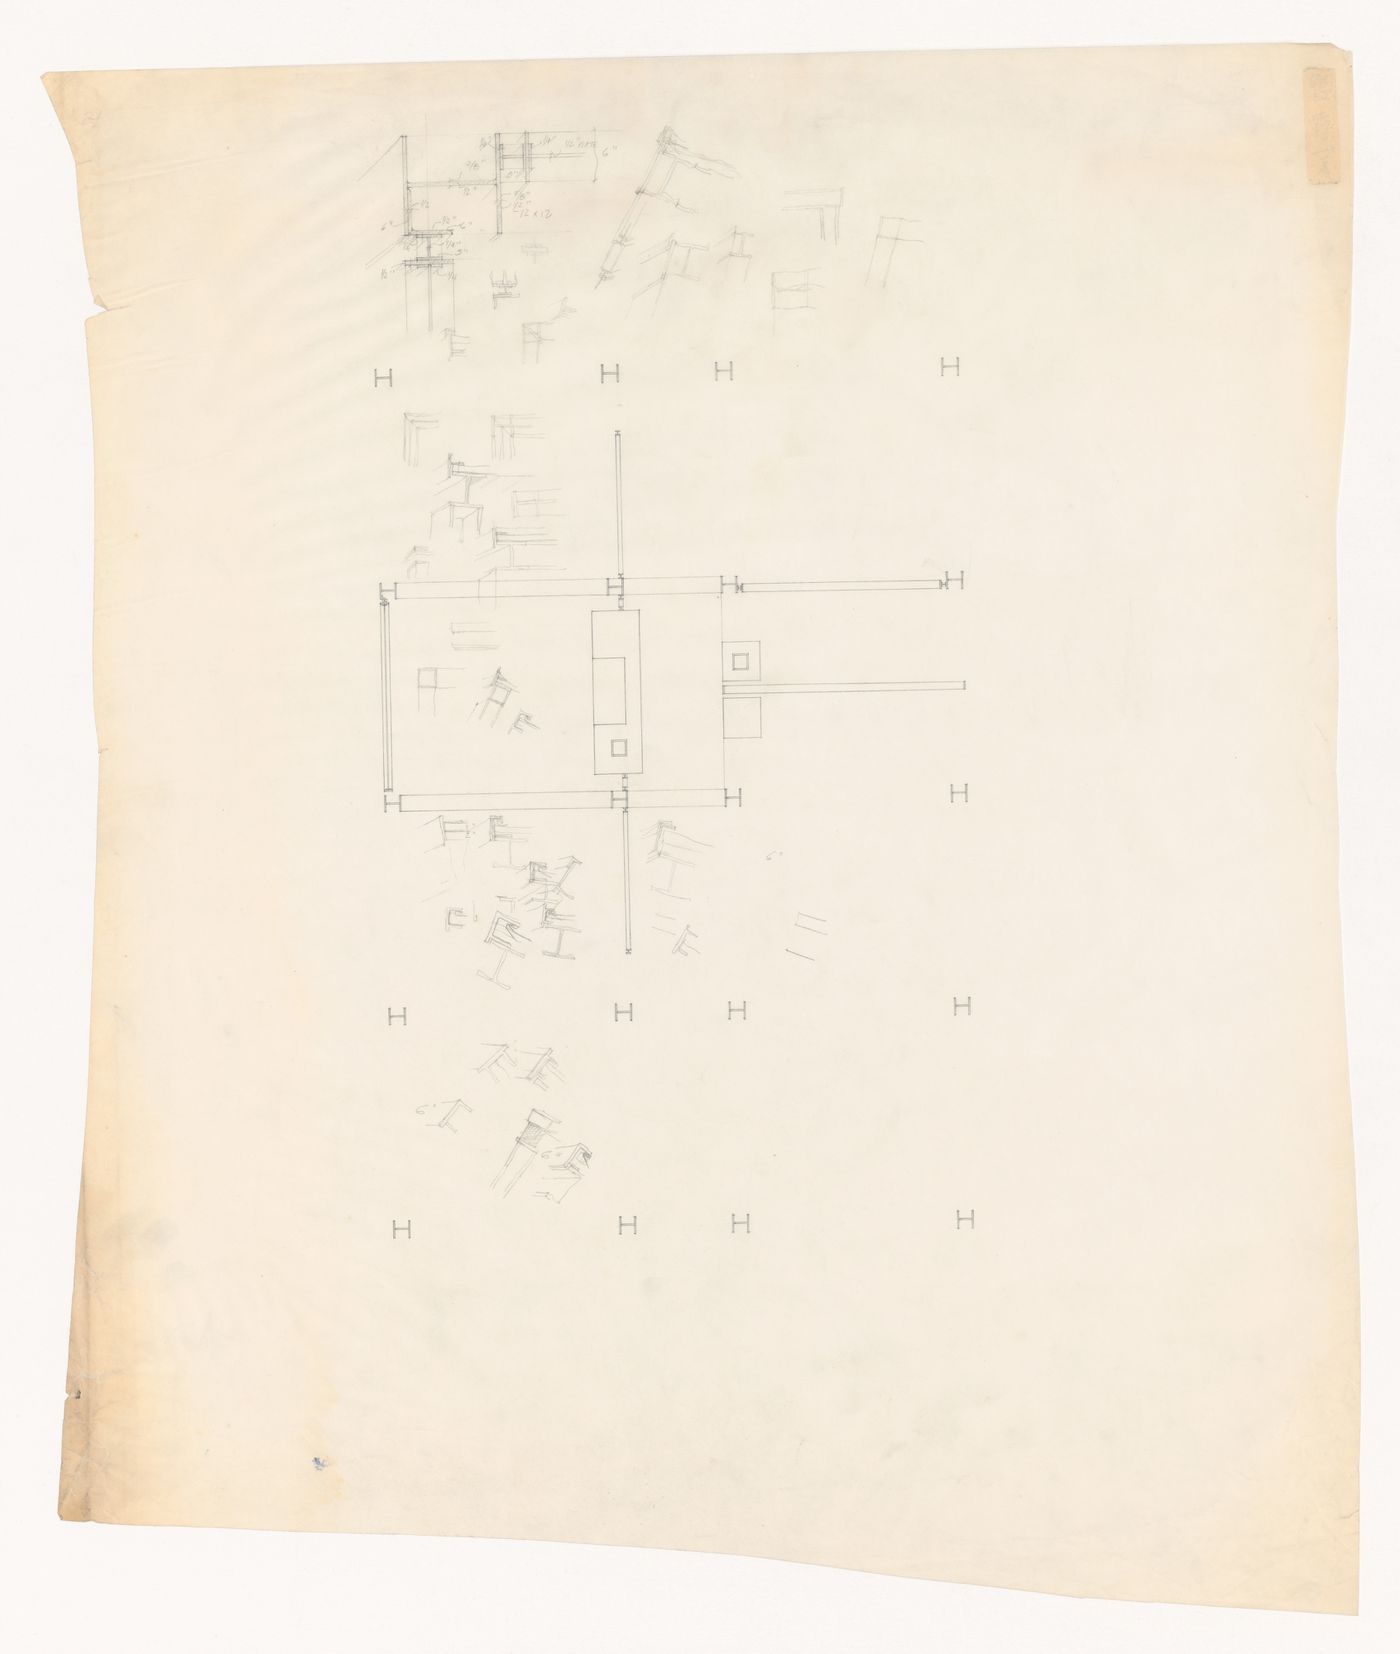 Plan and sketches for Piano Houses